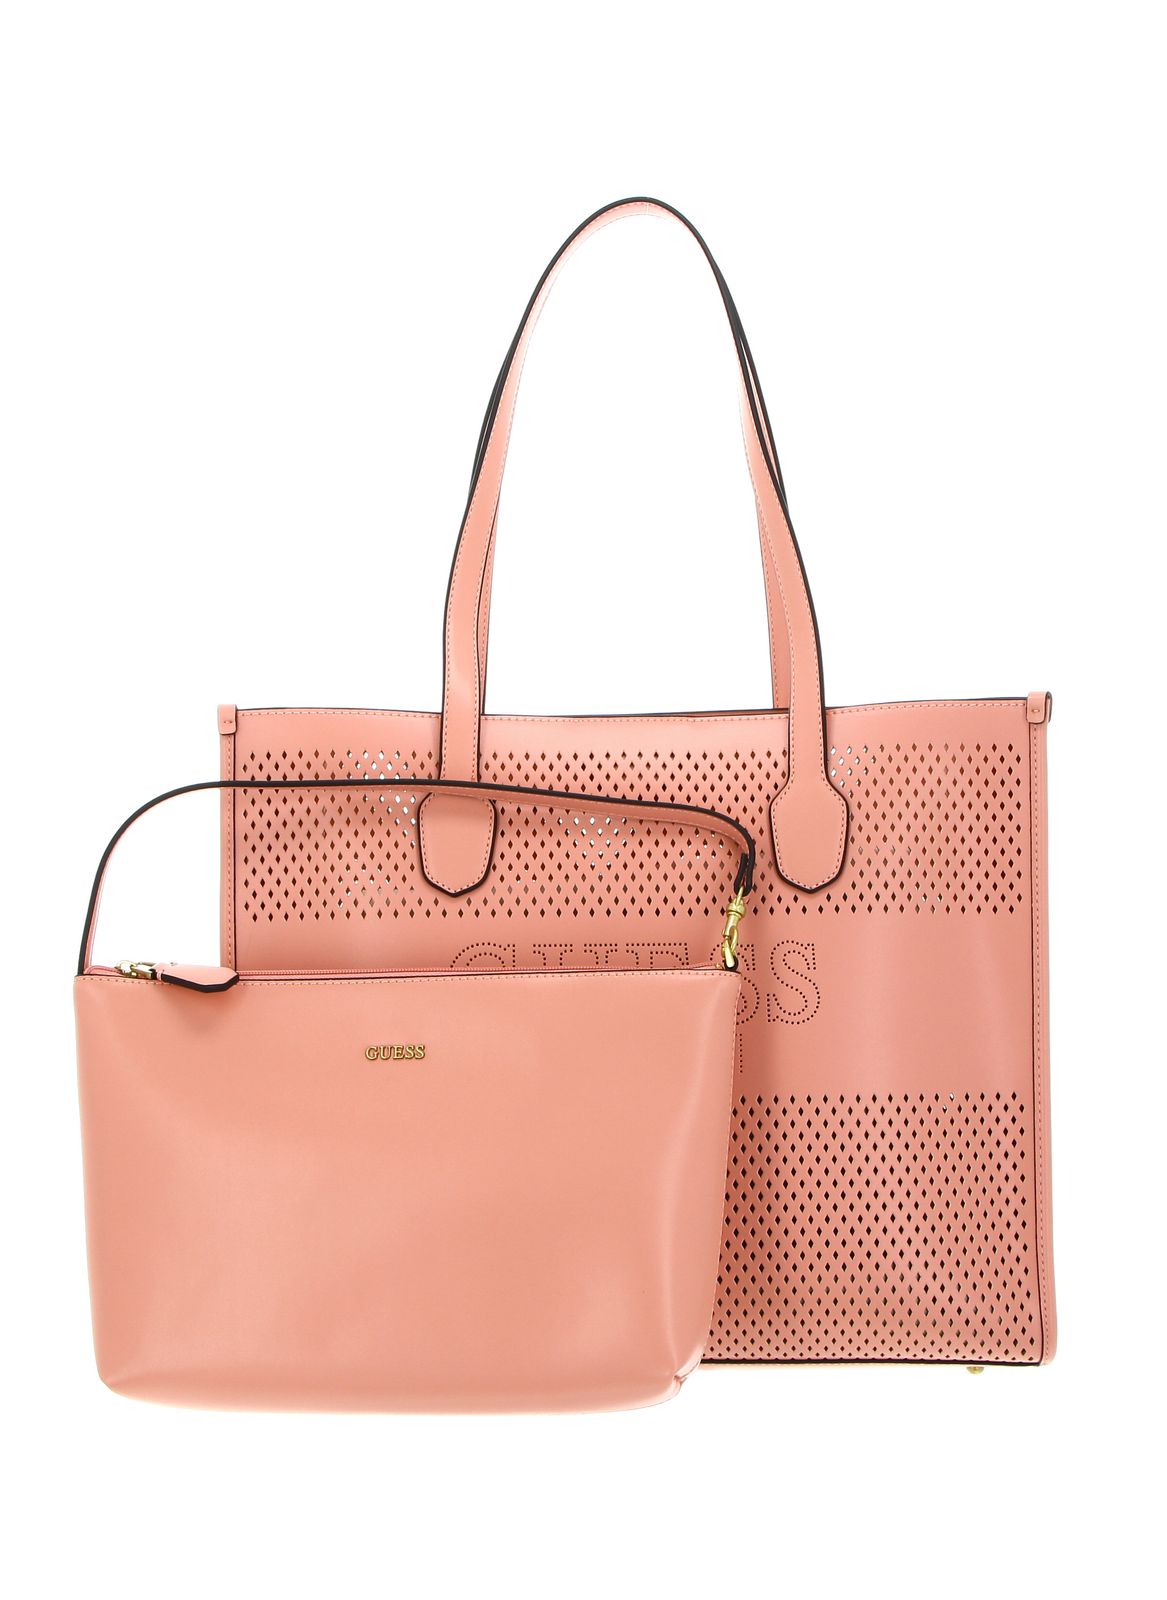 GUESS Pink Tote Bags